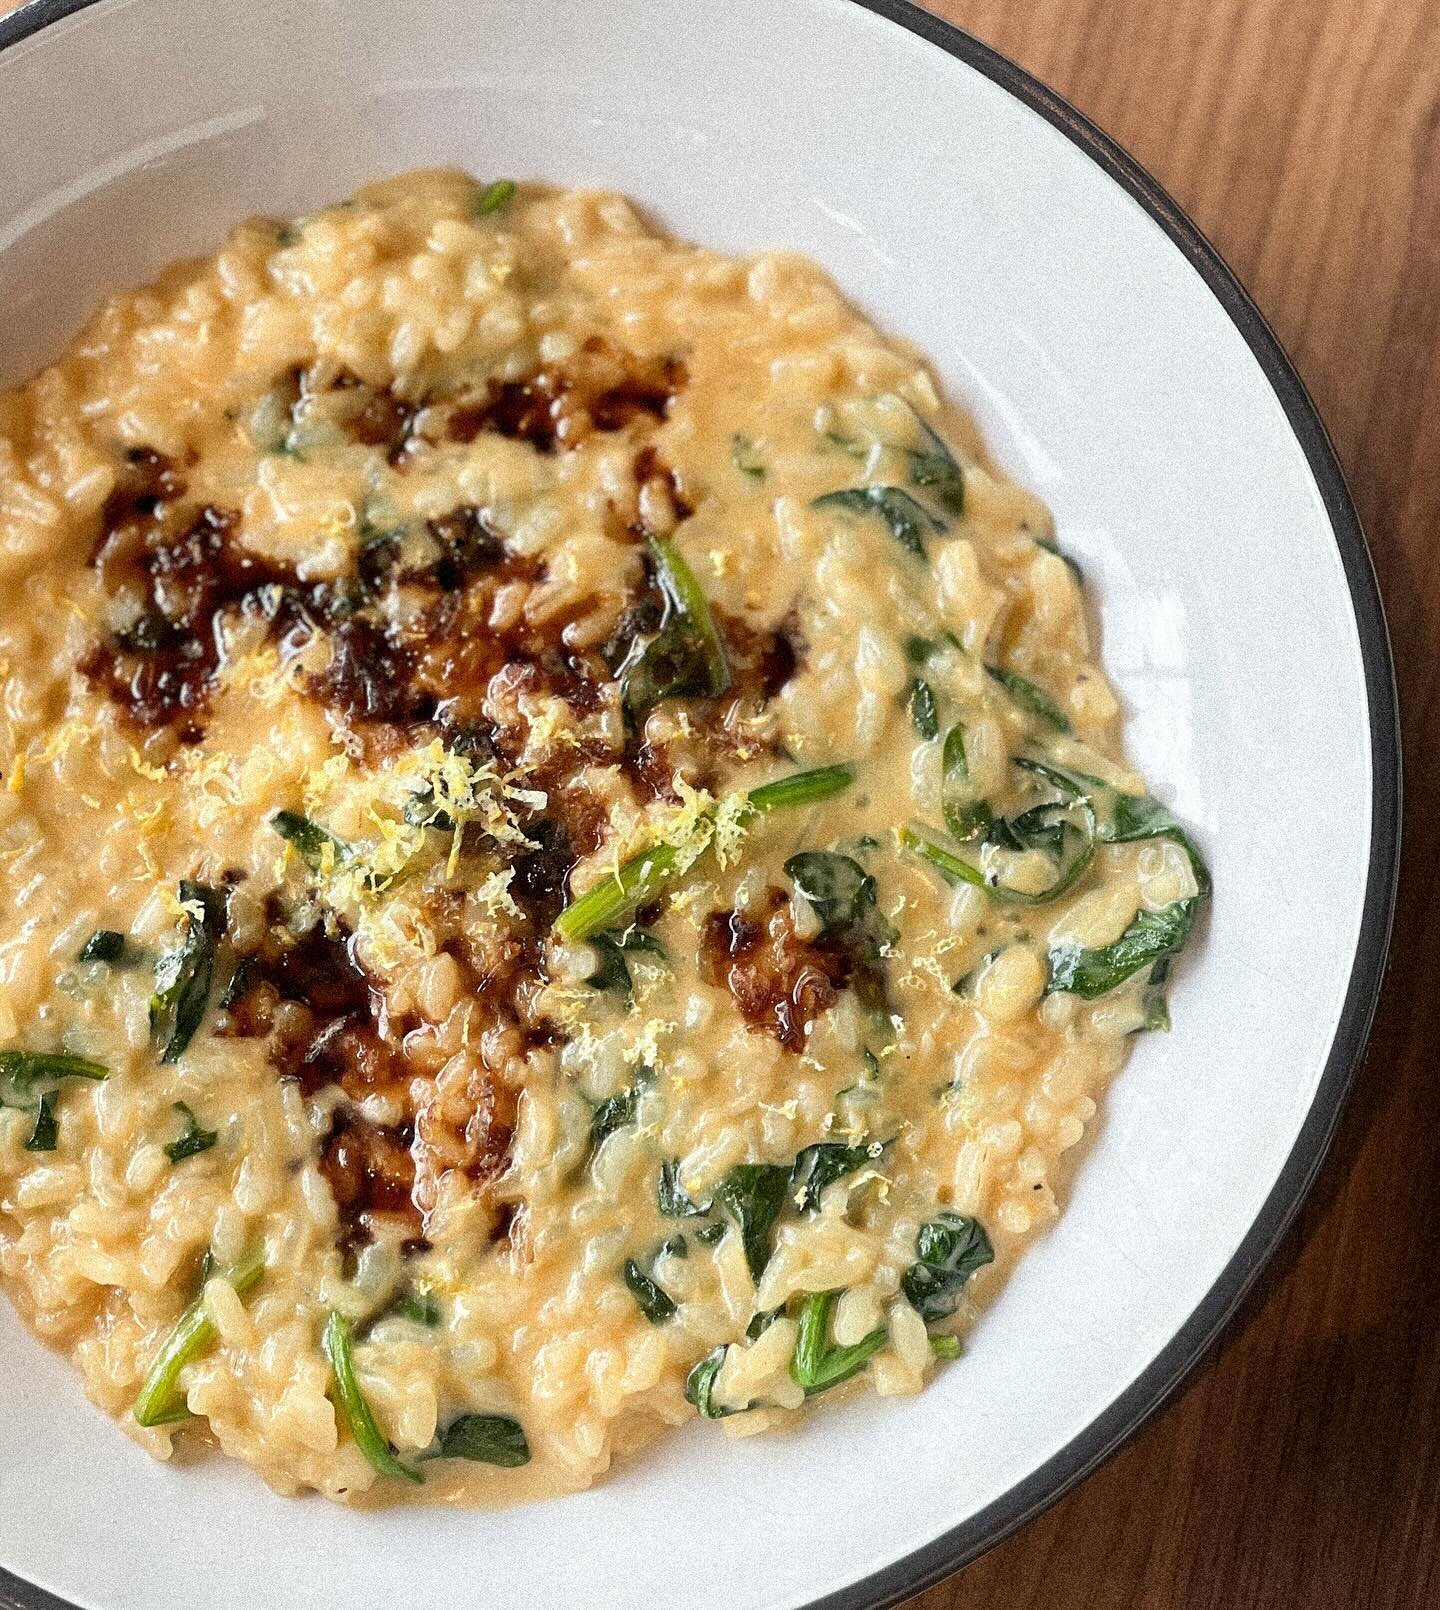 Risotto Florentine with spinach, lemon, balsamic glaze 🍋 

It&rsquo;s warm and bright, just what you might need for today&rsquo;s forecast 🌧️ 
.
.
.
#plantbased #vegan #restaurant #nashville #nashvillerestaurant